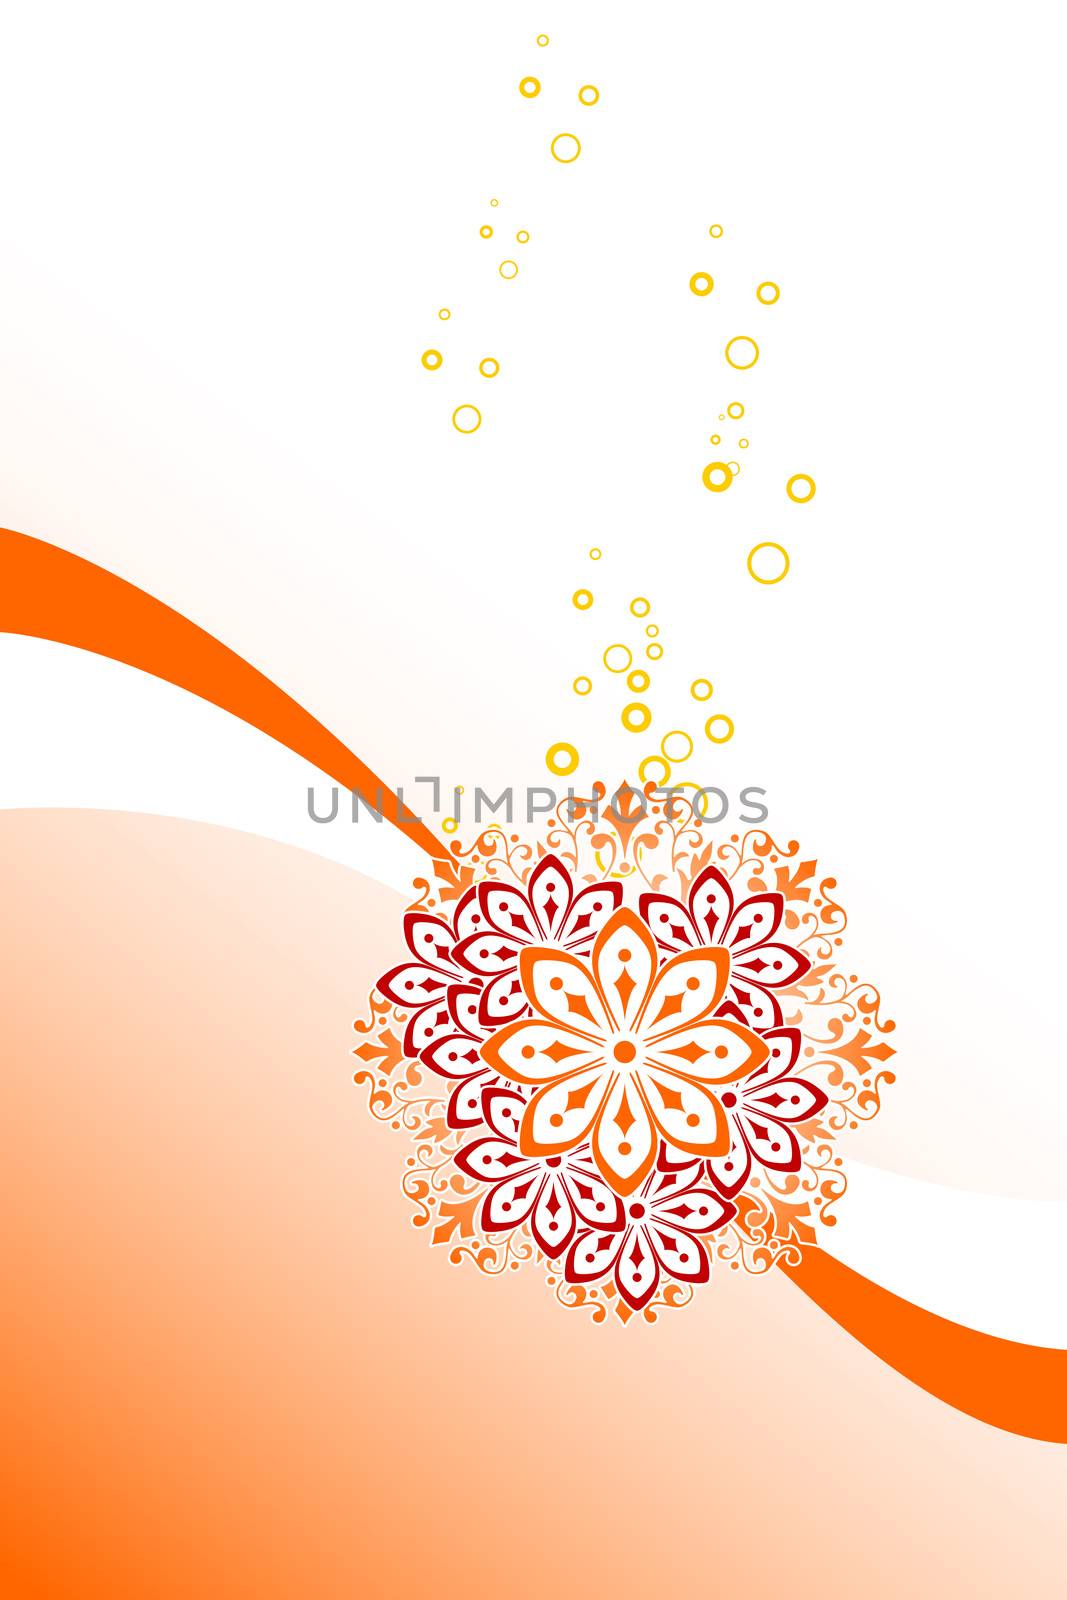 abstract background with circles and flowers, vector illustration